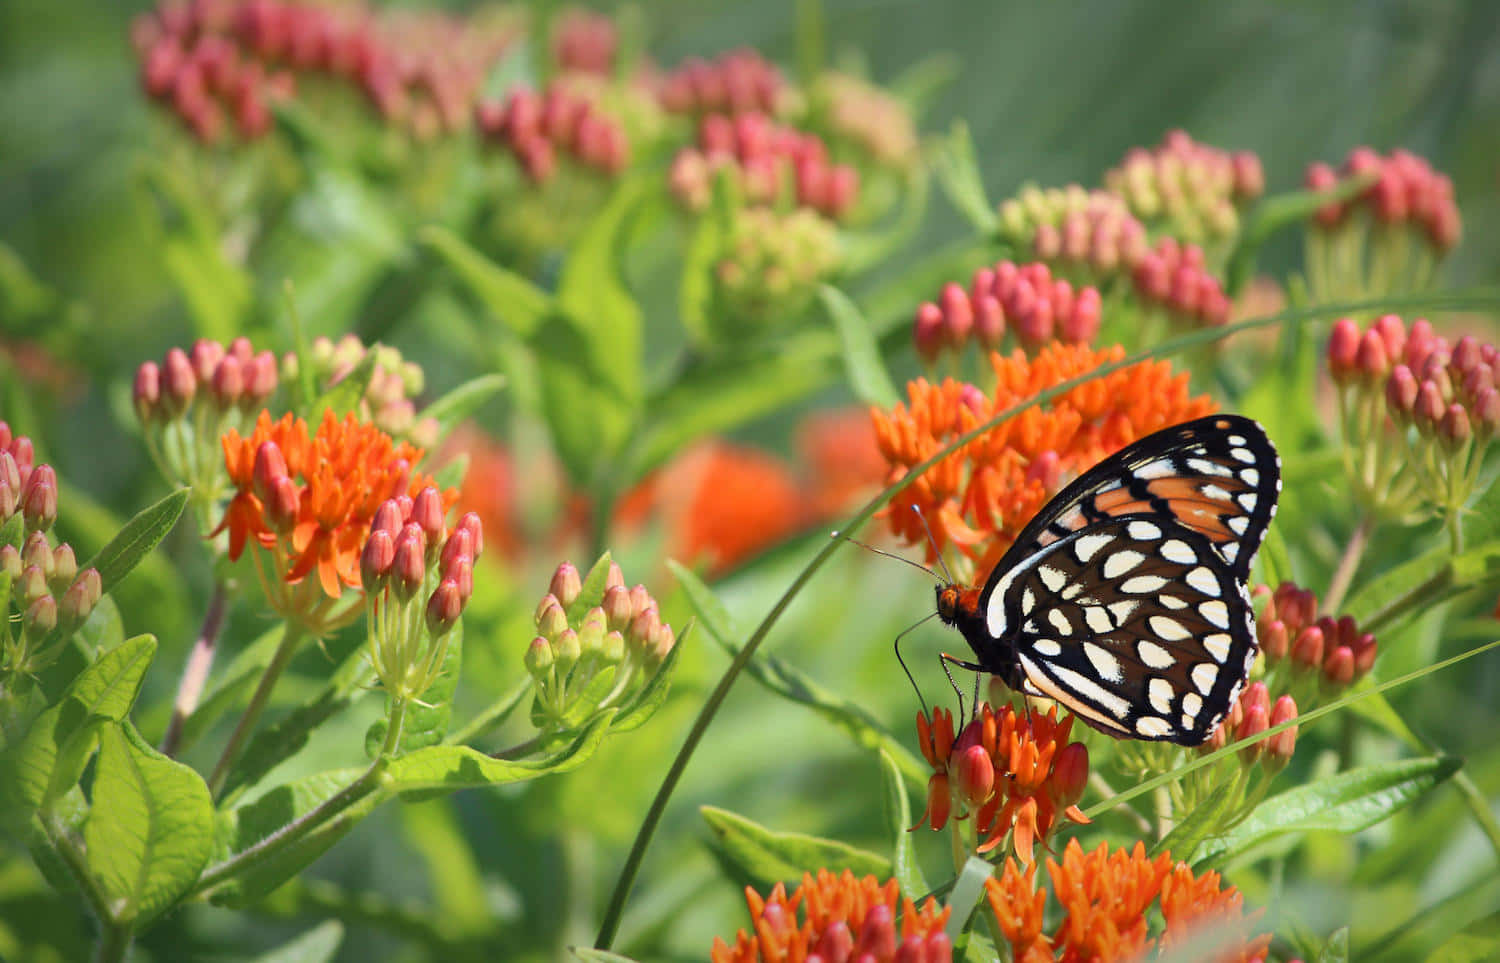 A vibrant field of Butterfly Weed. Wallpaper